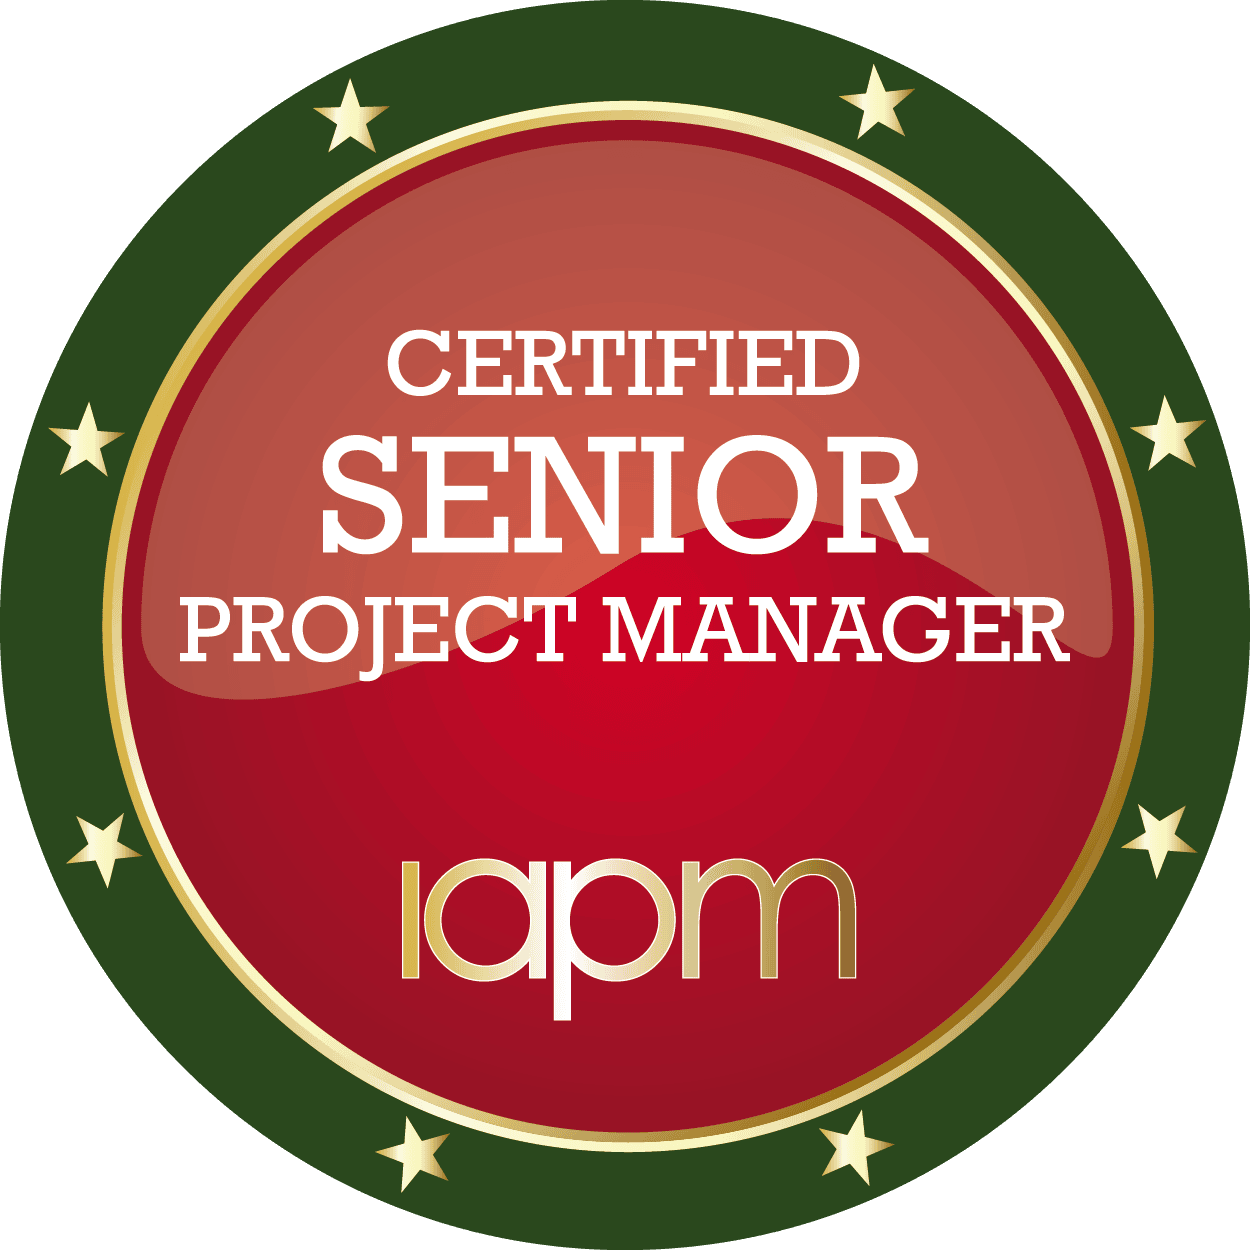 Certified Senior Project Manager IAPM